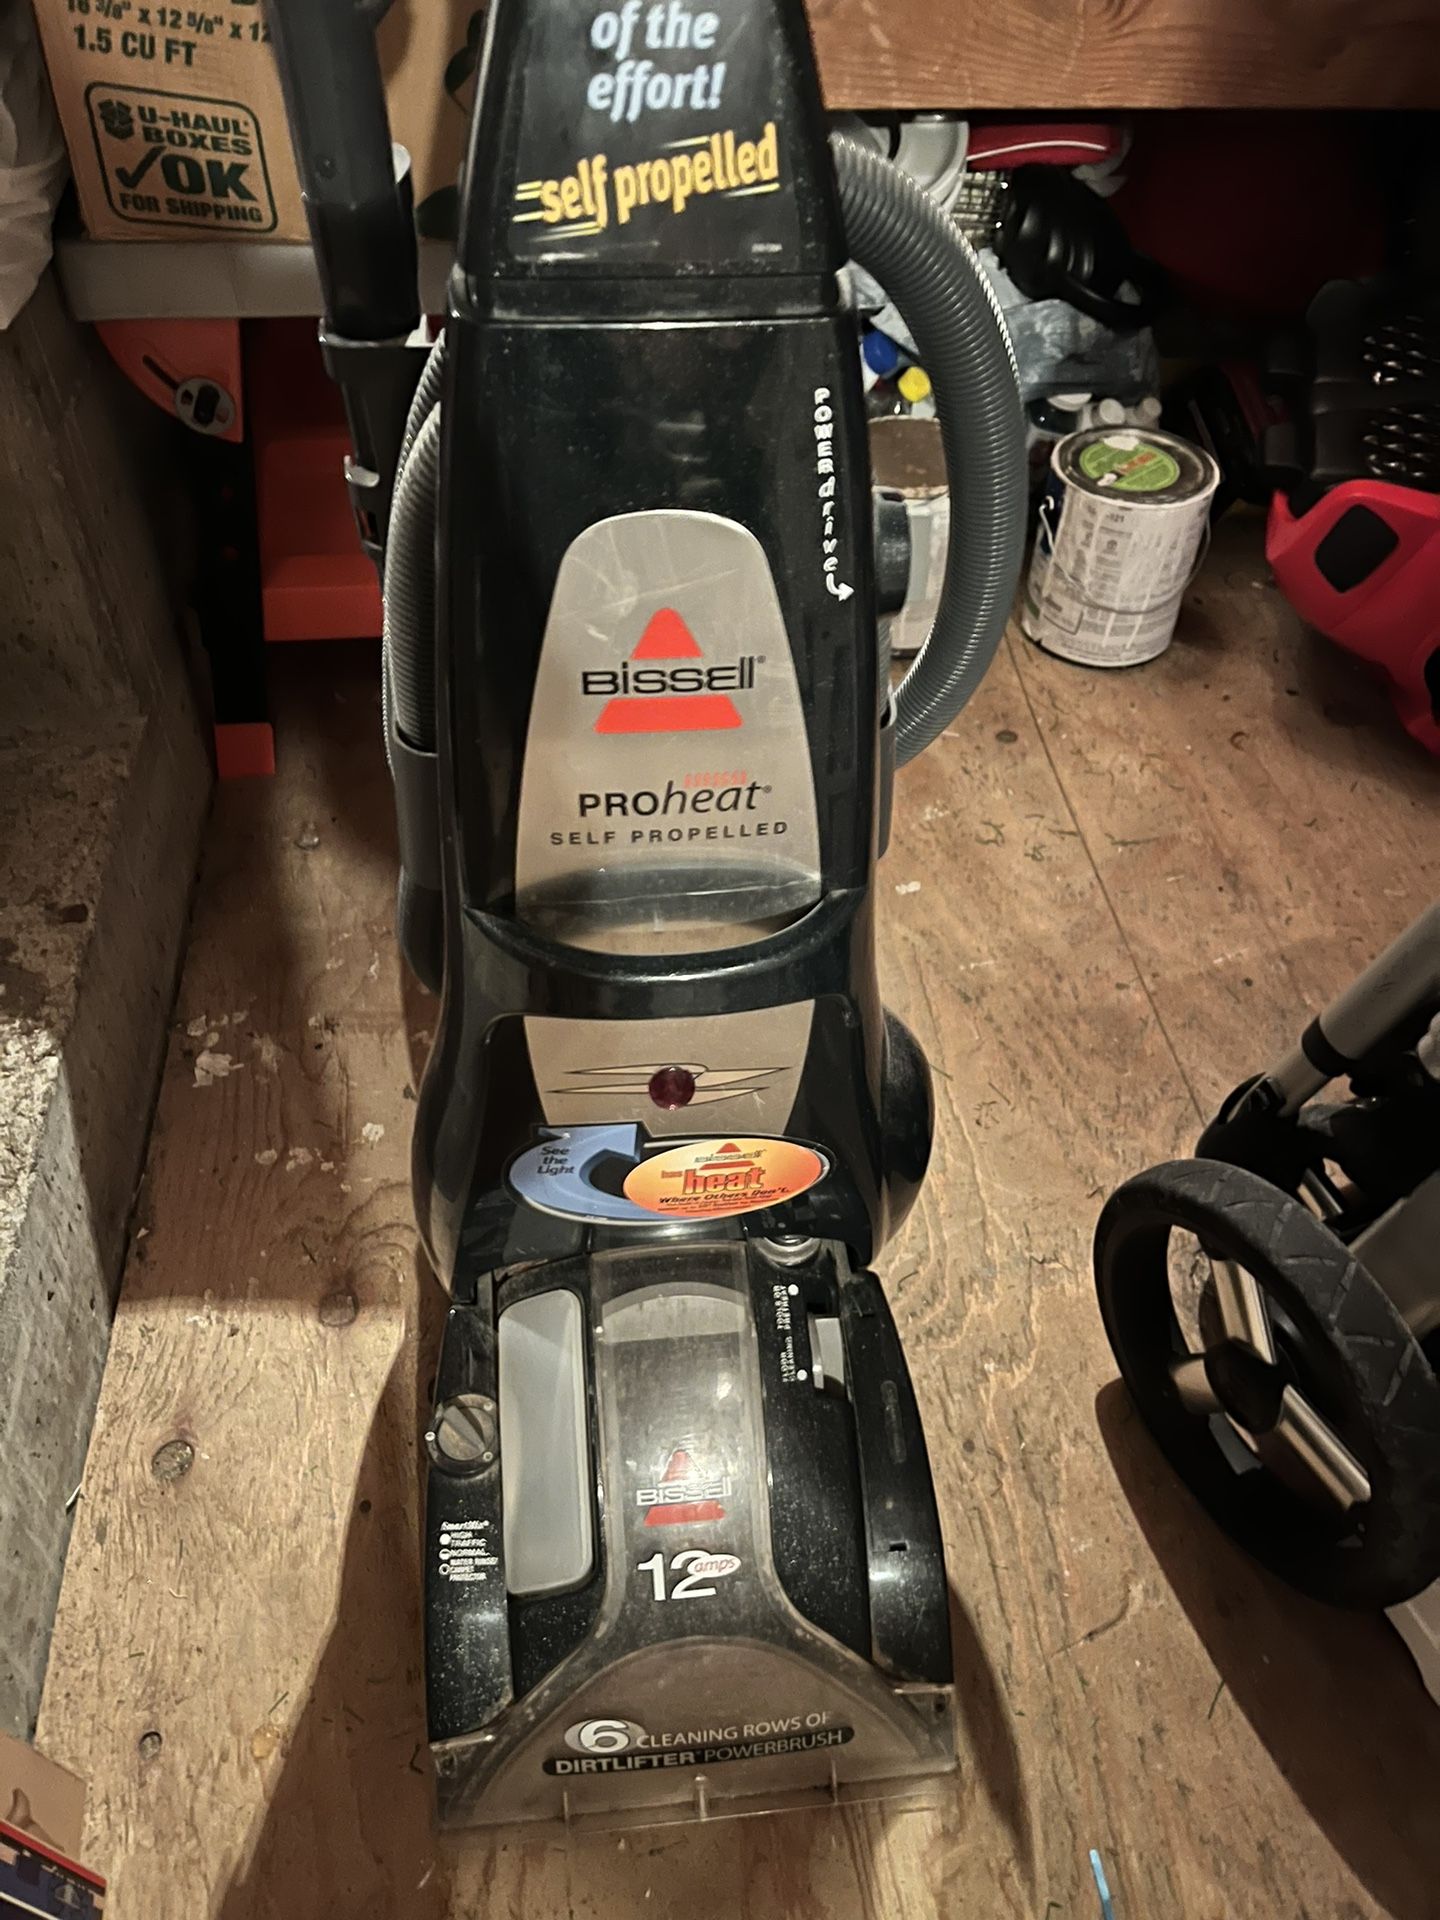 Bissell ProHeat Self Propelled Carpet Cleaner